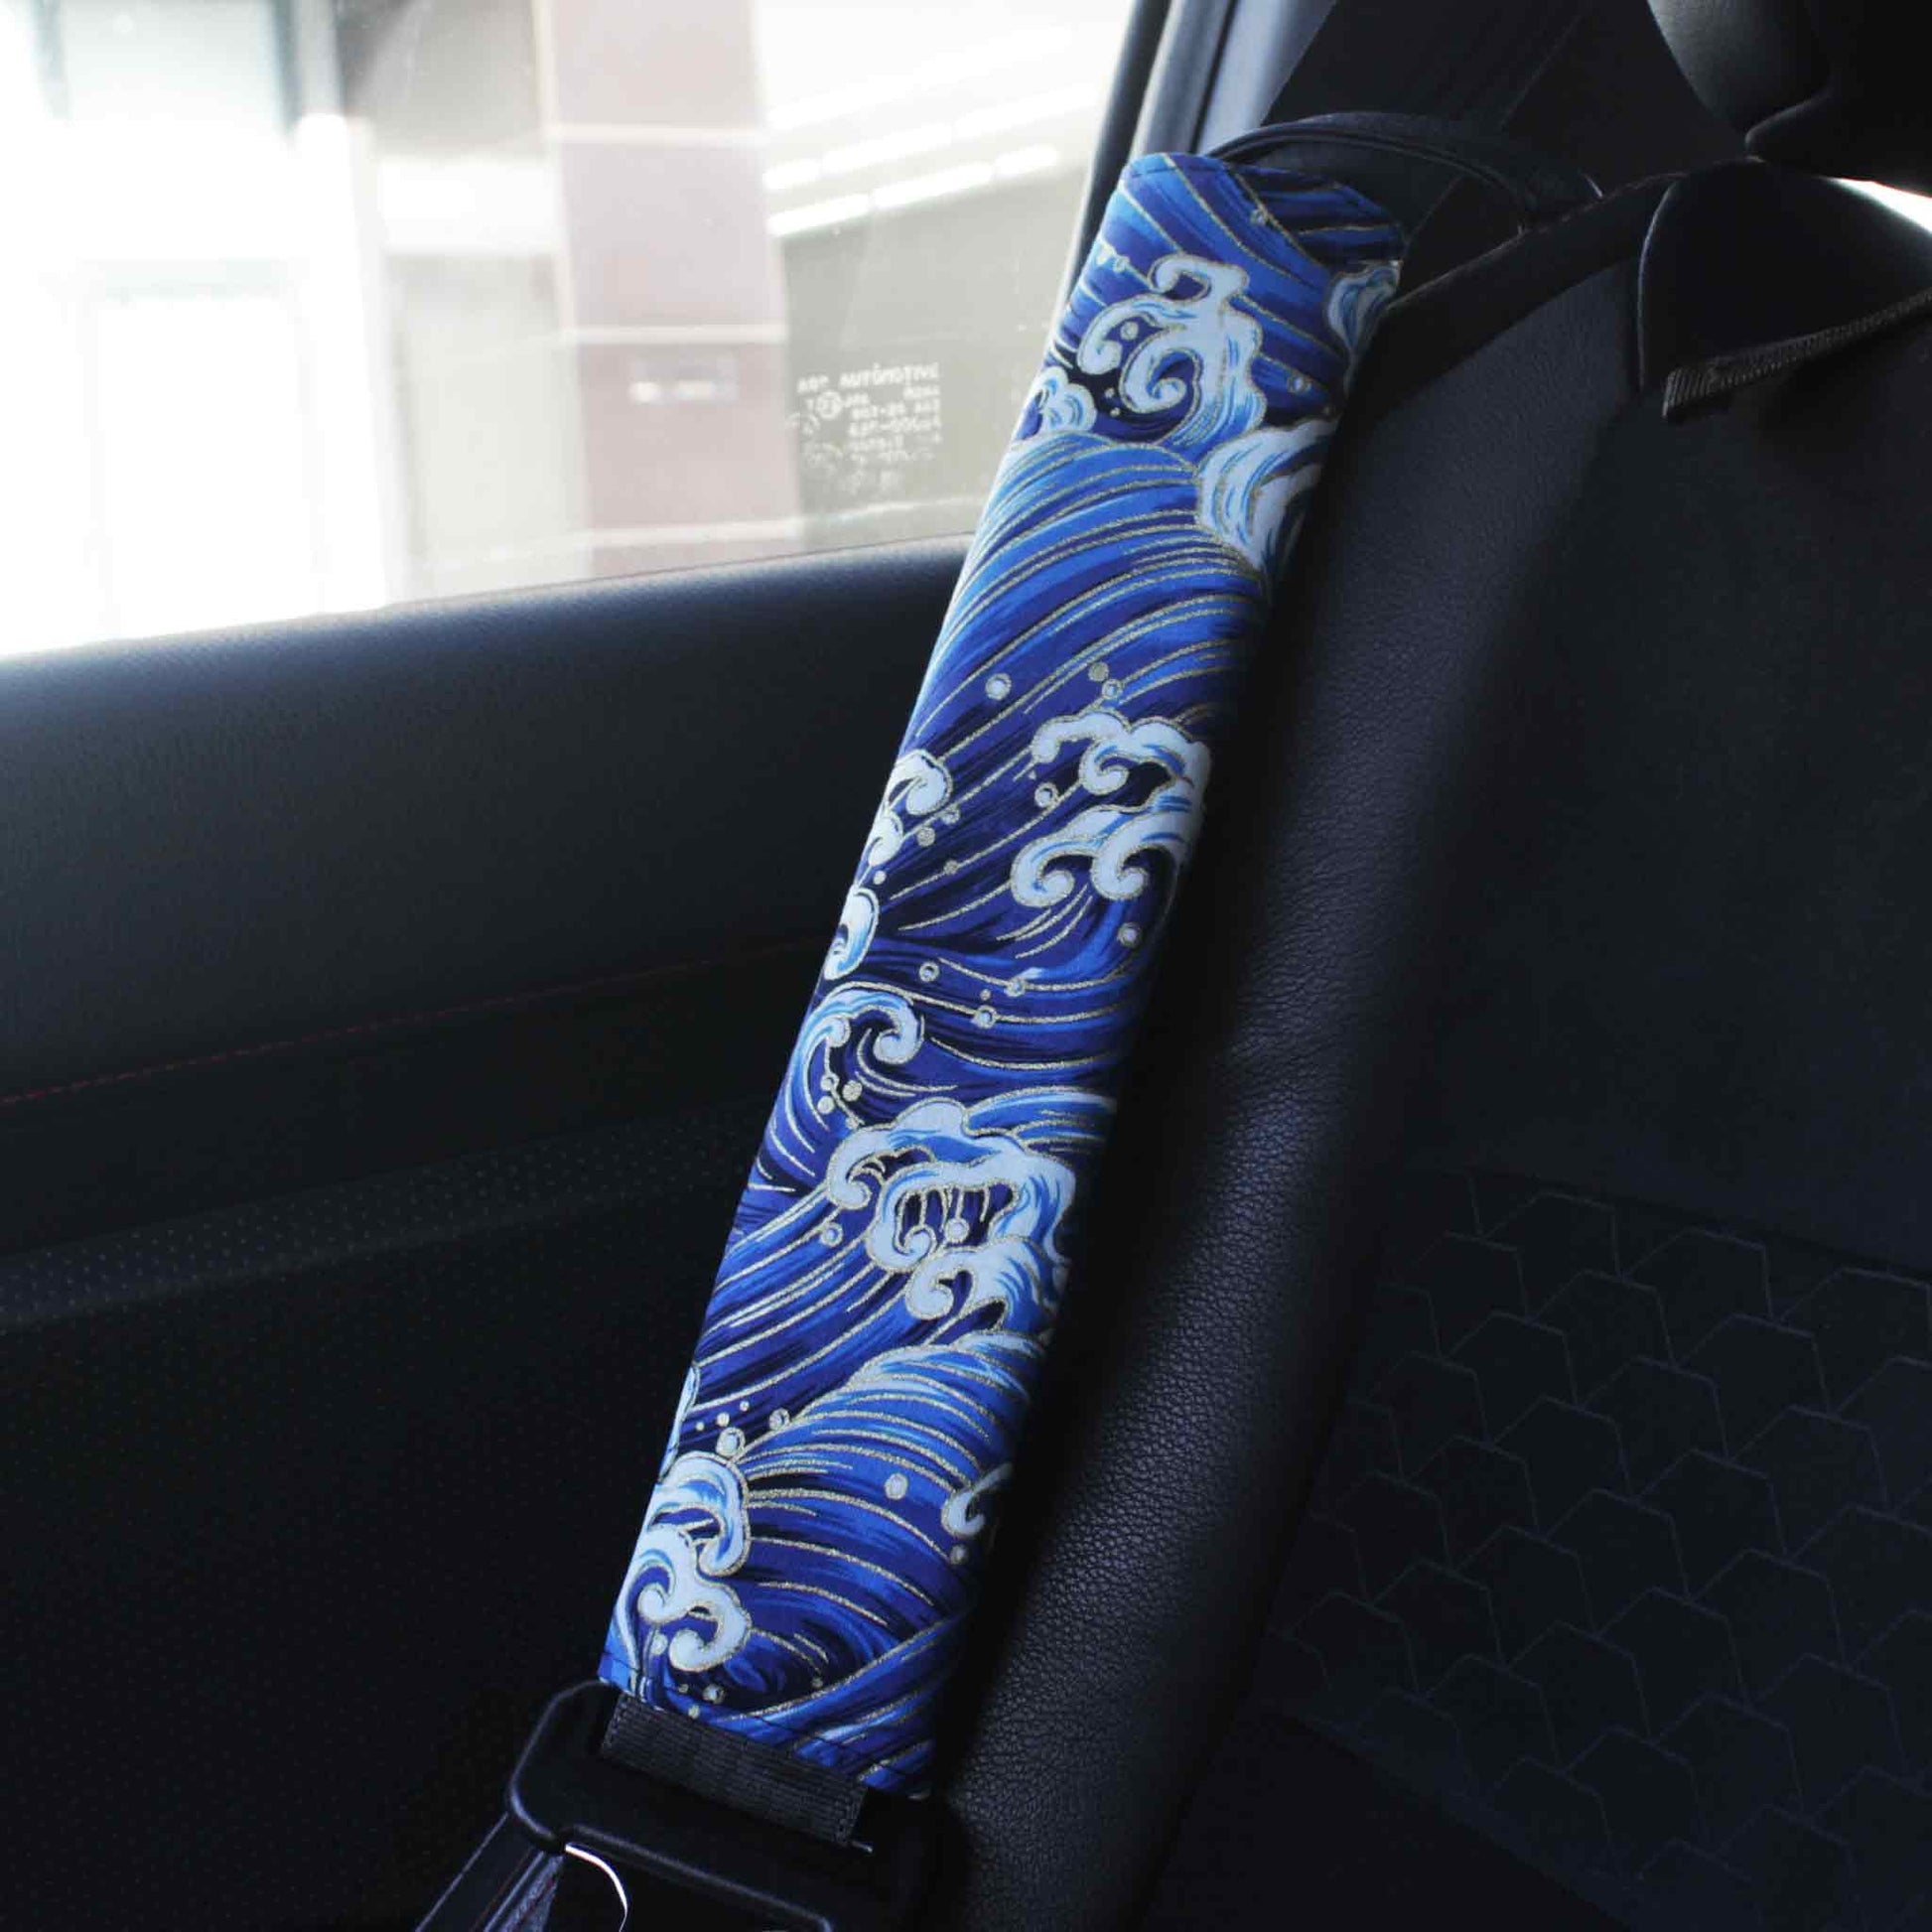 A seat belt cover with blue great waves pattern installed on a Toyota 86's seat belt